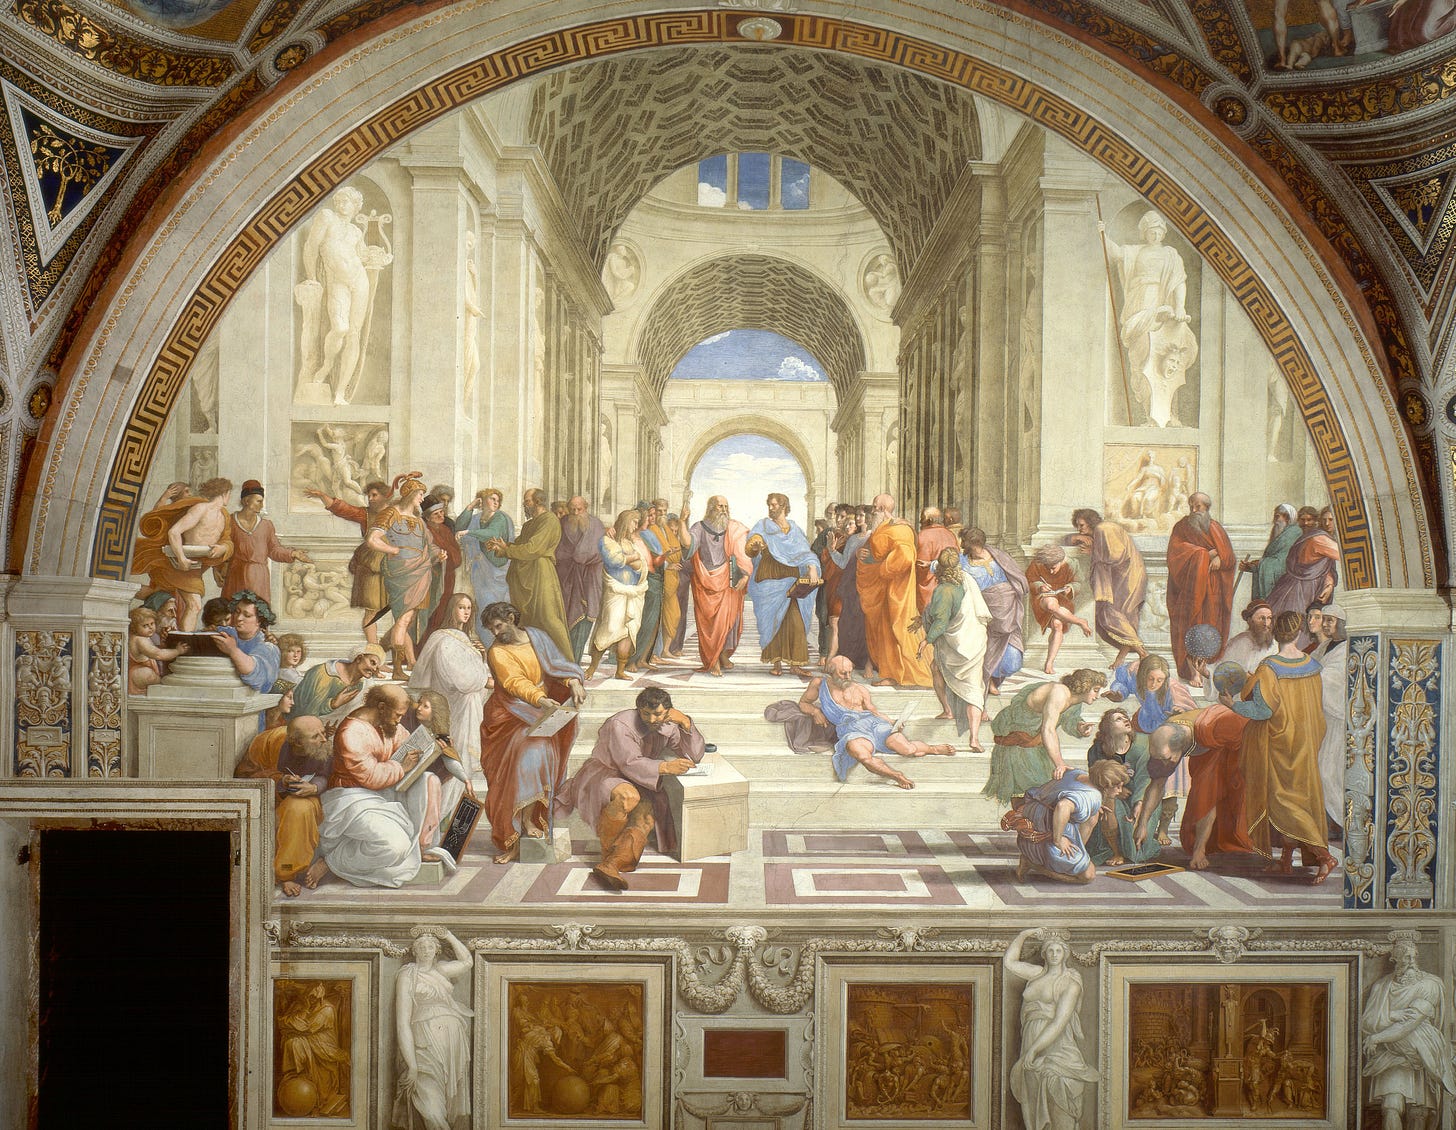 A fresco painting of numerous Greek men in animated discussion within a large Greek temple.